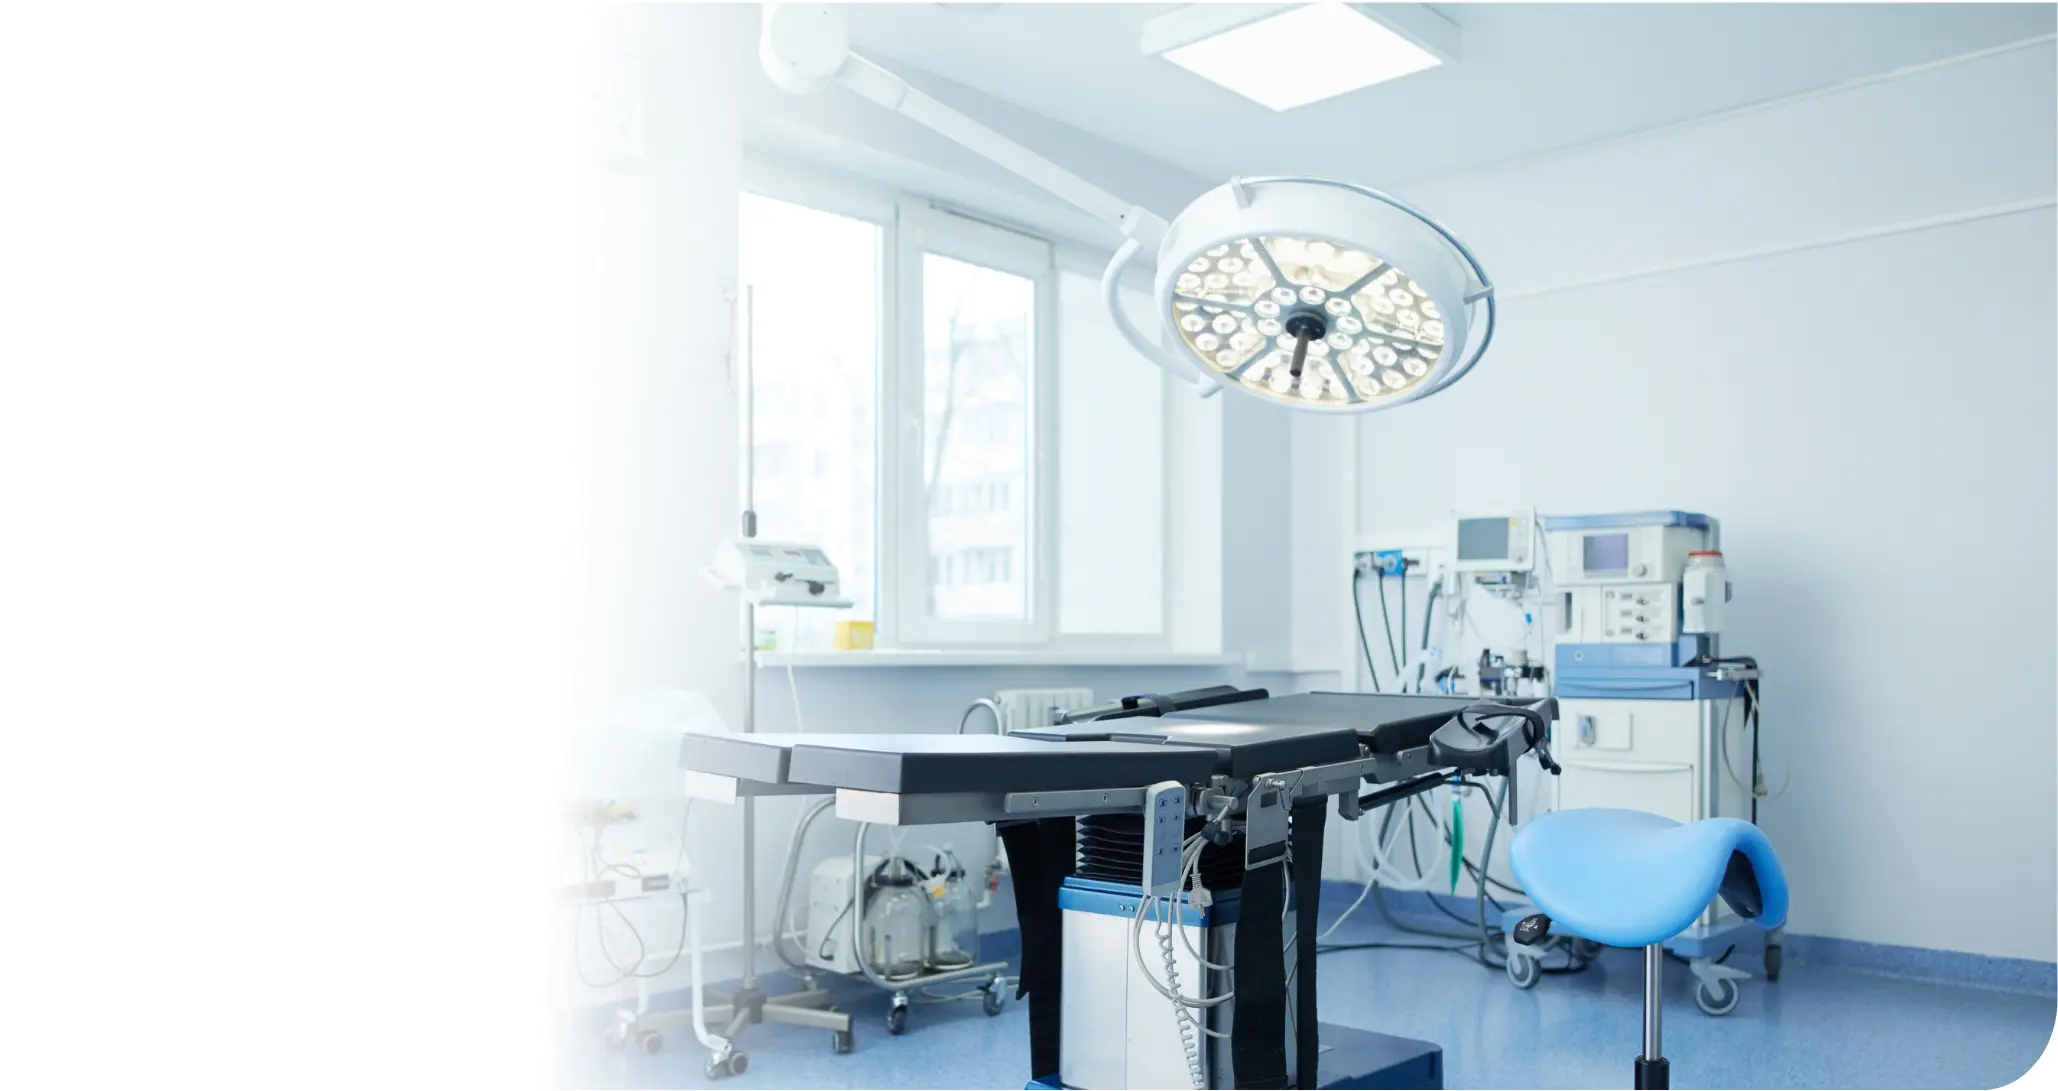 Clean surgical room